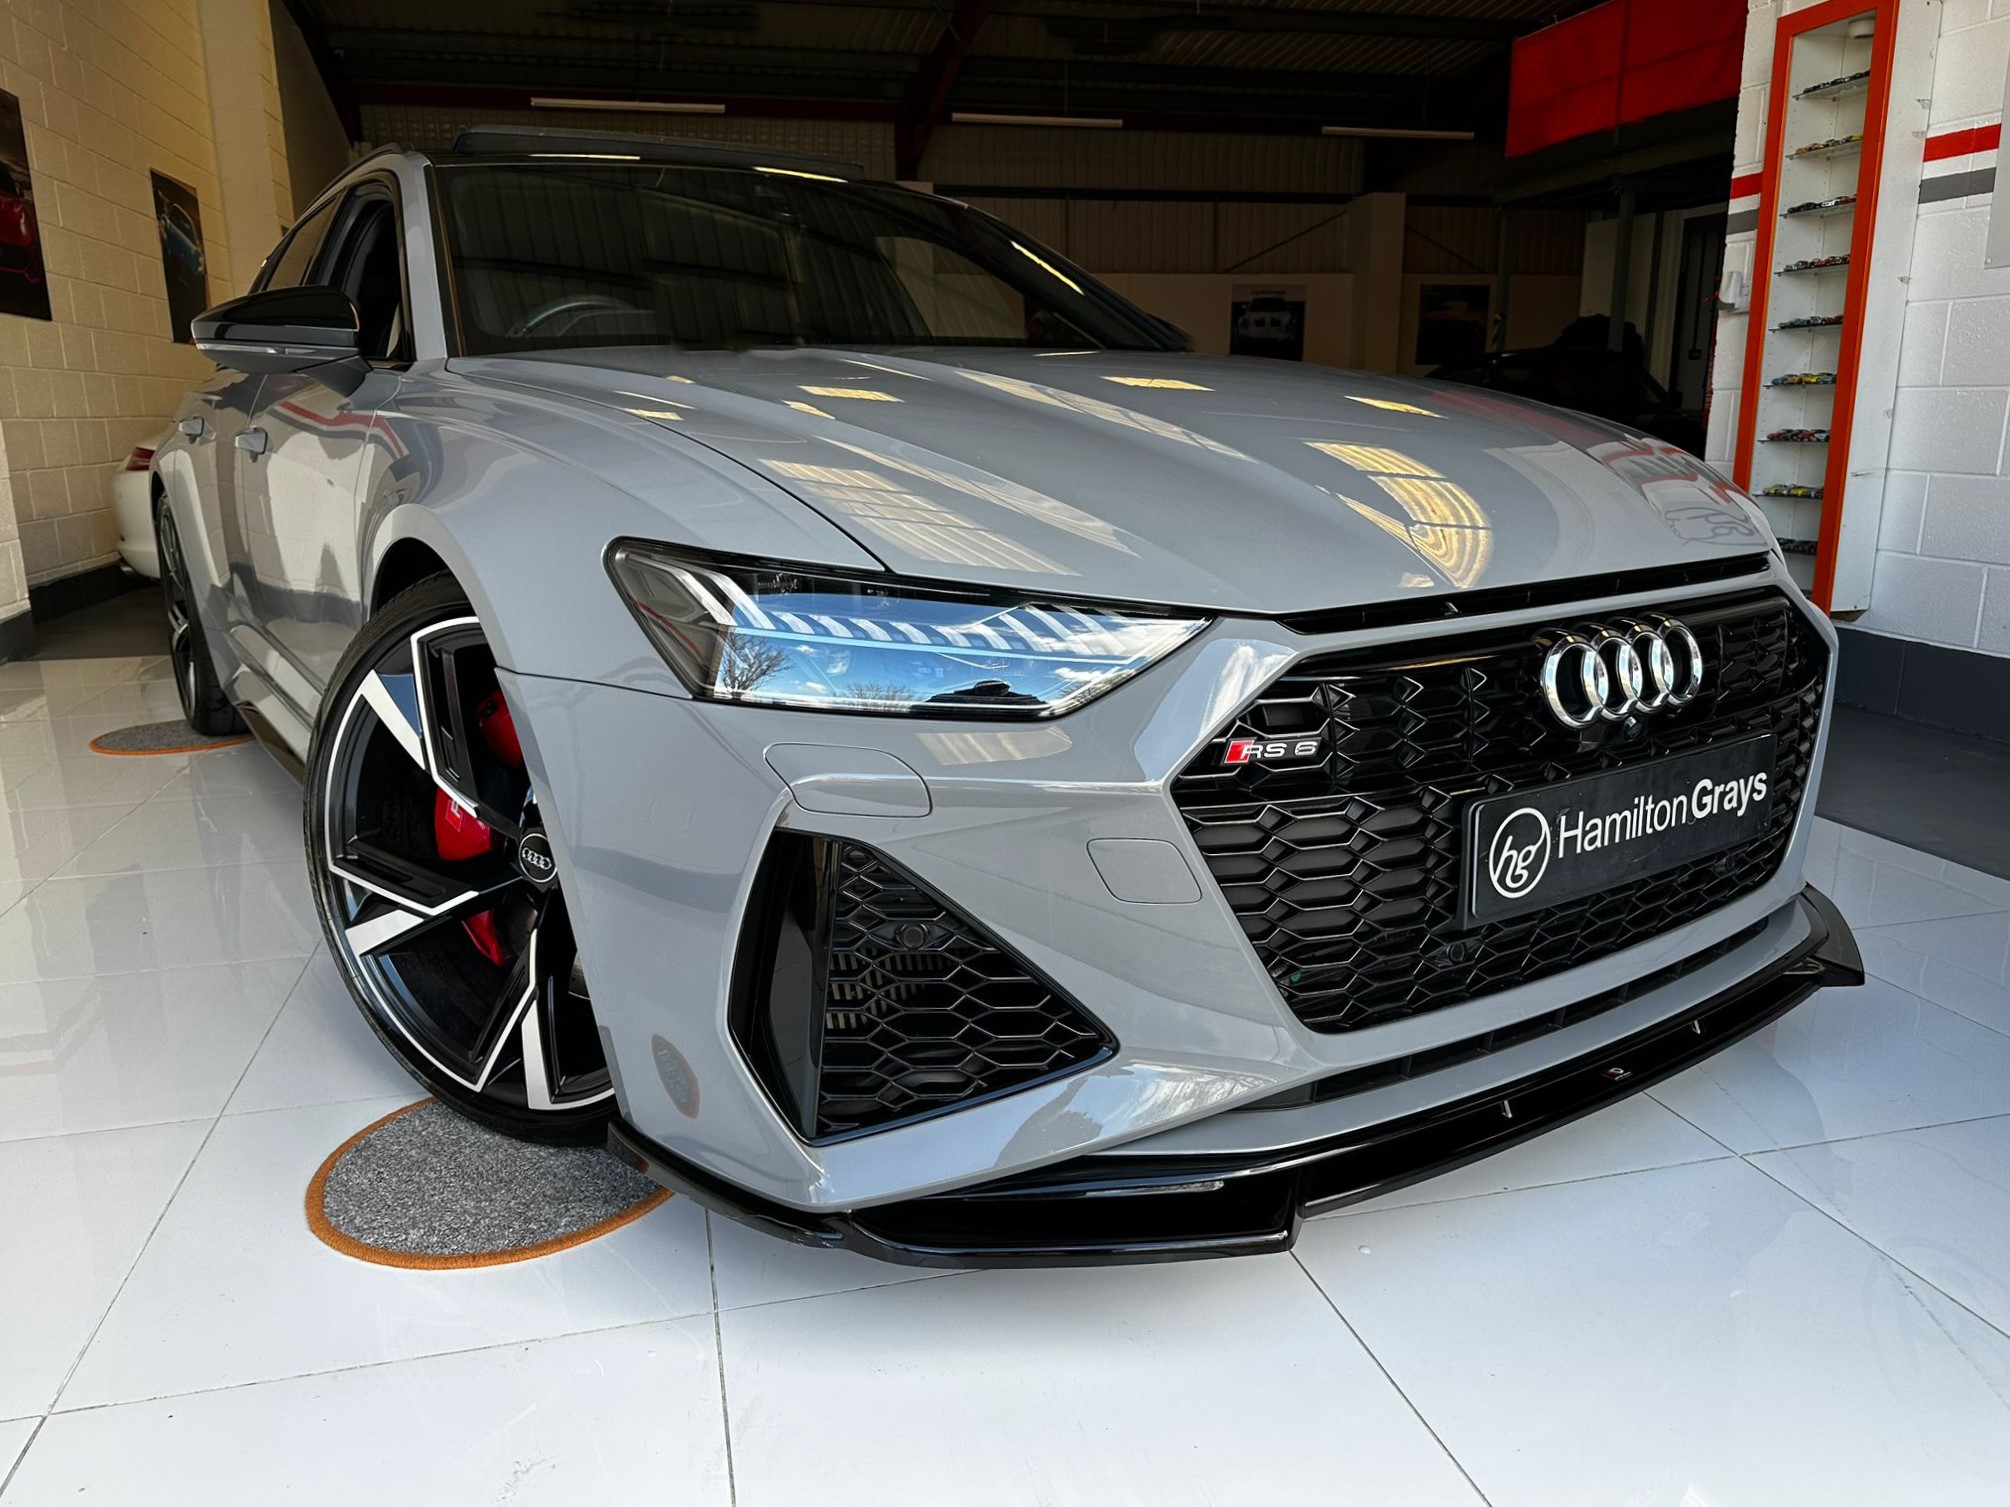 2020 (69) Audi RS6 Avant 4.0 TFSI V8 ‘Launch Edition Vorsprung’ Tiptronic quattro.  Nardo Grey with Extended Black Leather. Only 25k. FASH. Derestricted 174 mph. Top Specification. £84,950